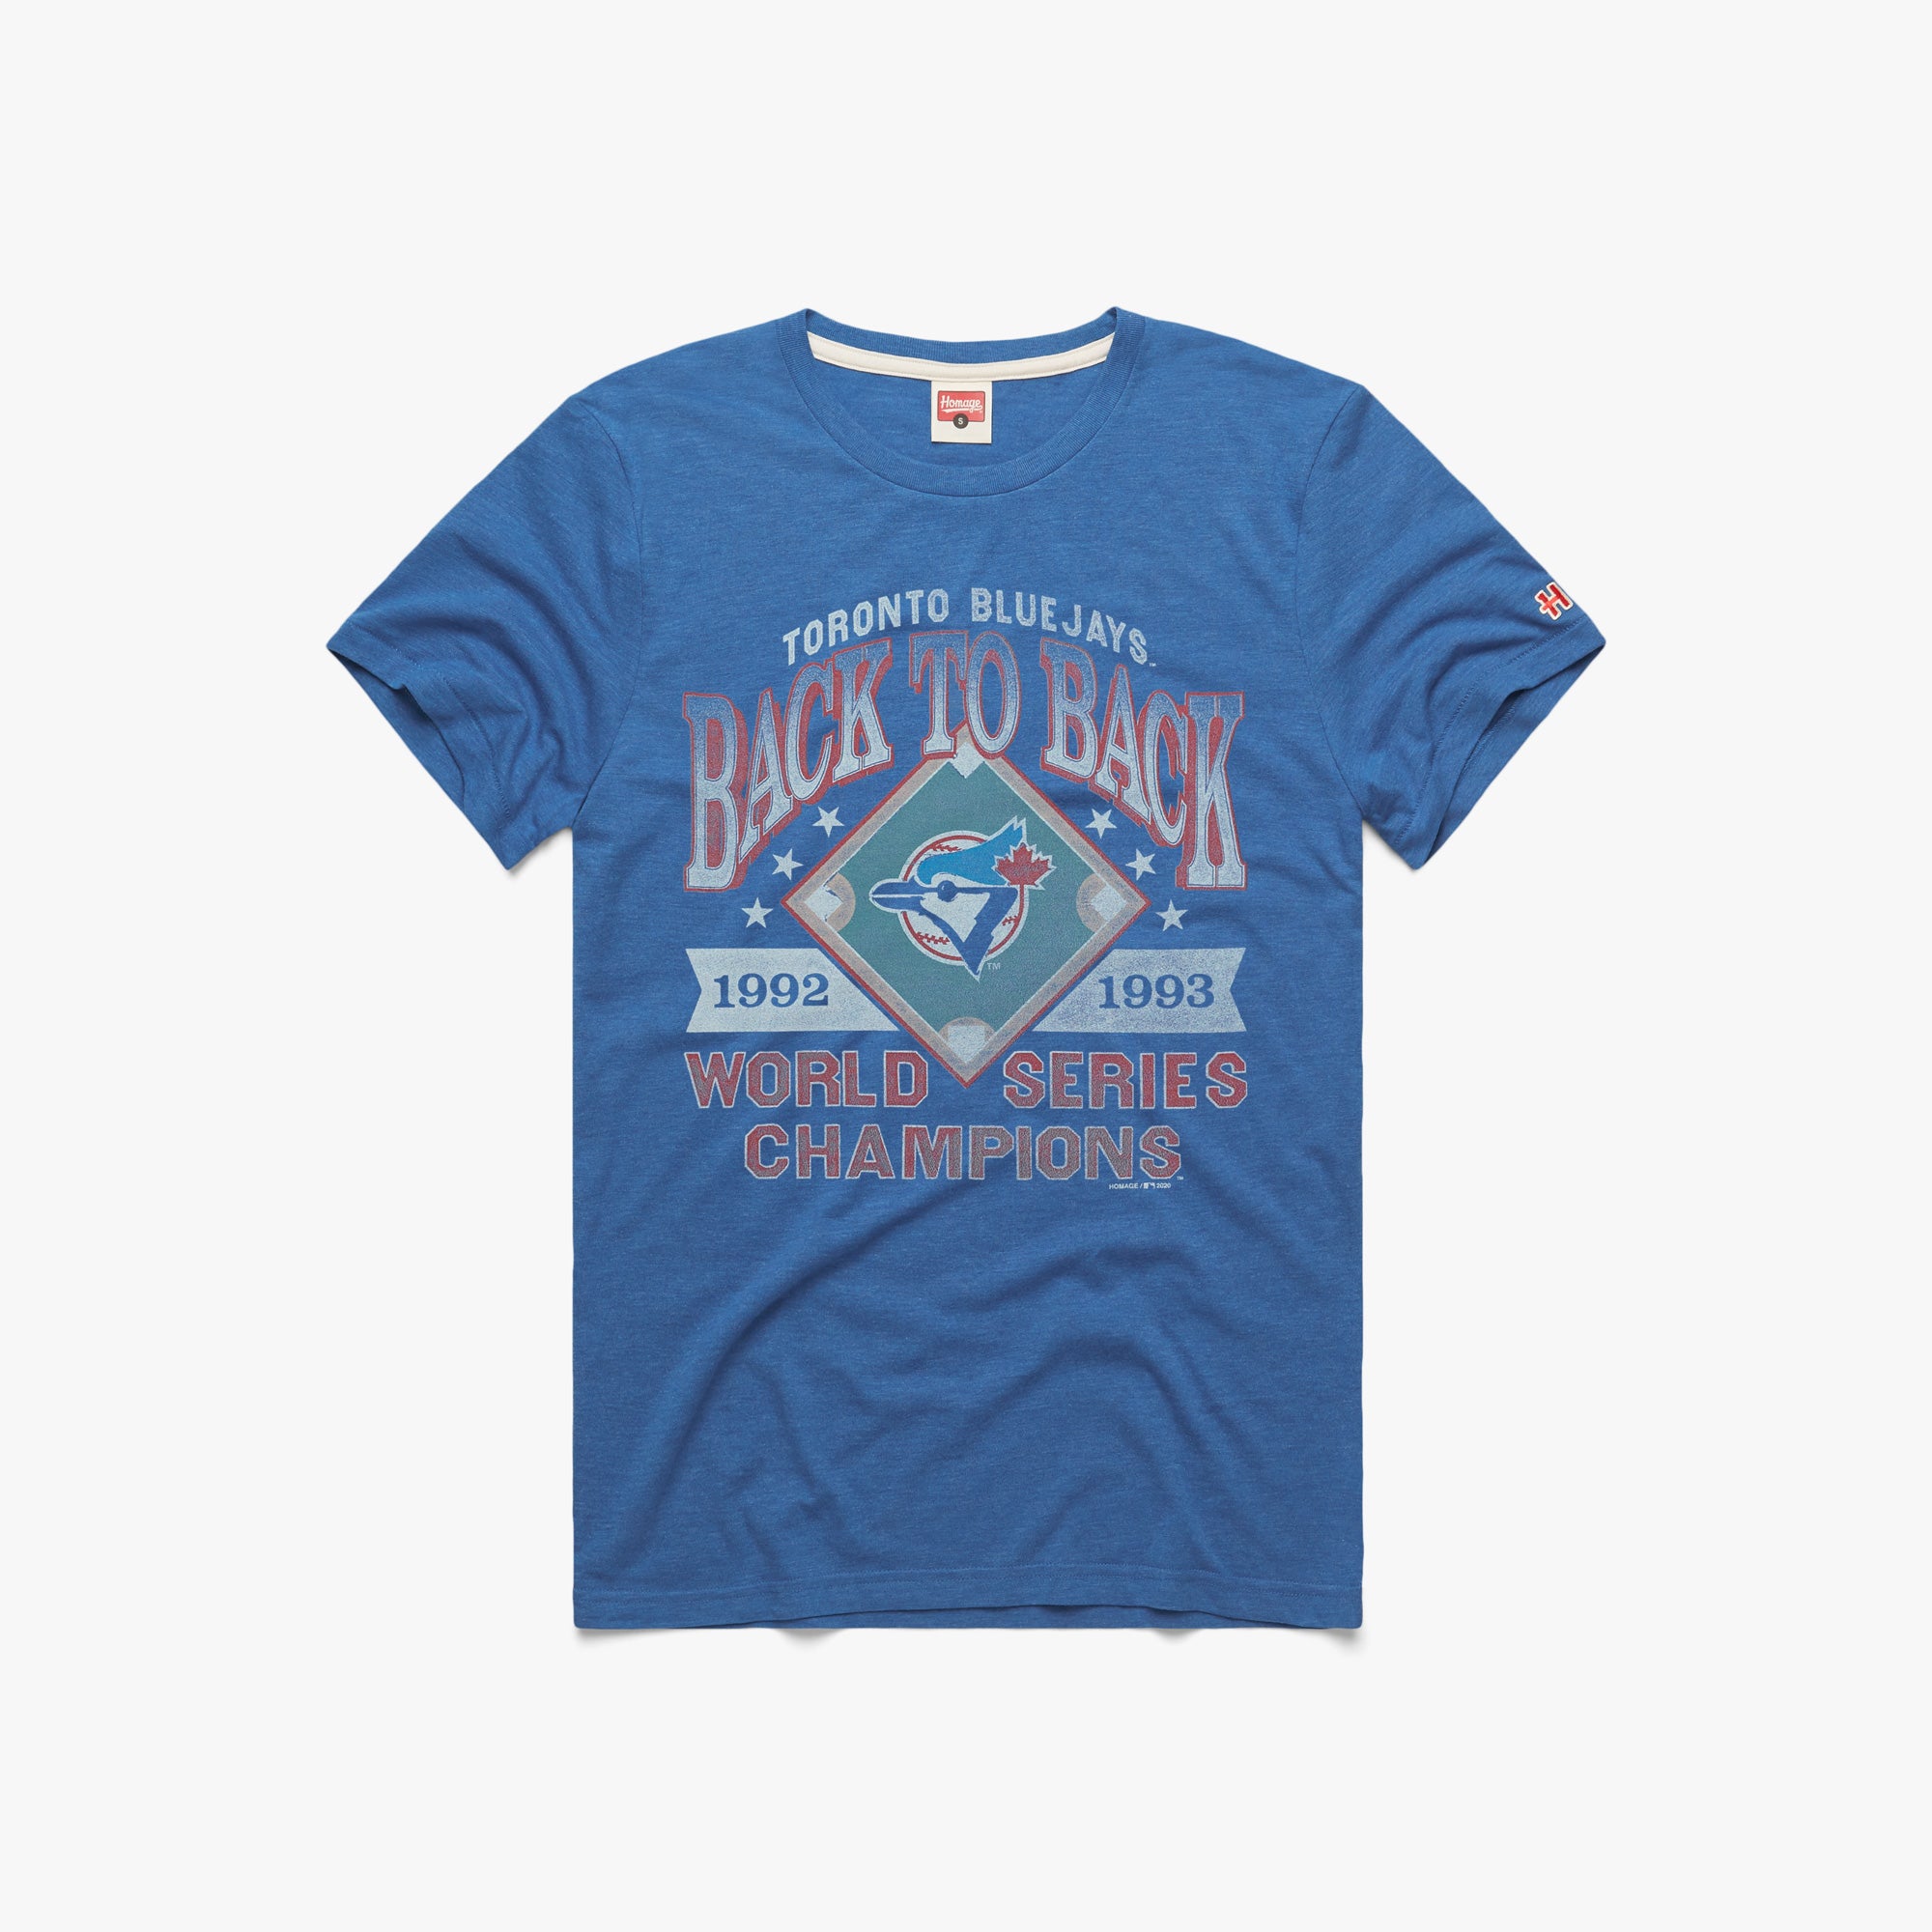 Toronto Blue Jays Back to Back Champs T-Shirt from Homage. | Royal Blue | Vintage Apparel from Homage.